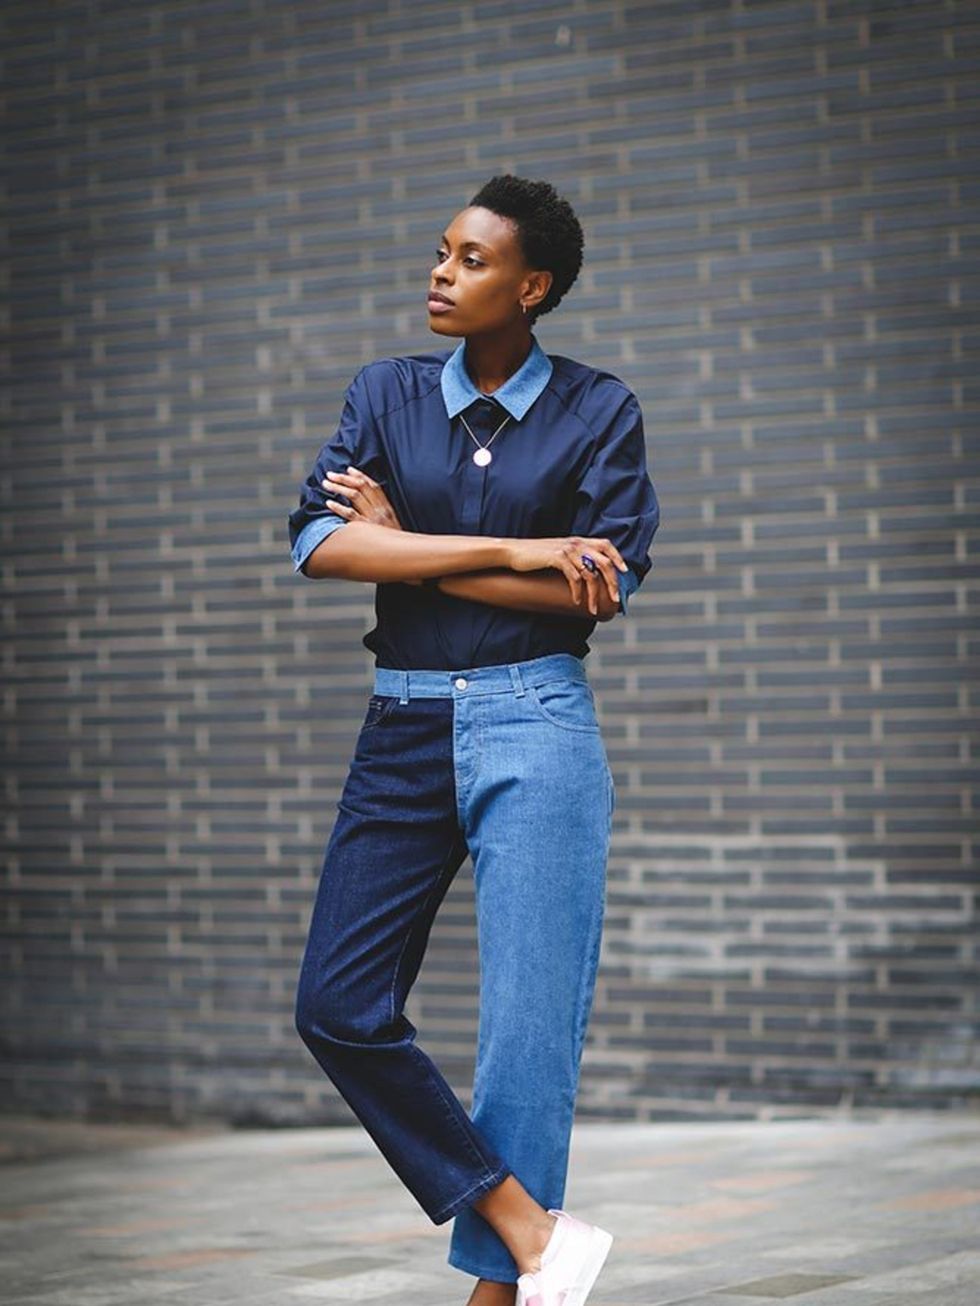 <p>Donna wears <a href="http://www.asos.com/ASOS-White/ASOS-WHITE-Shirt-with-Denim-Collar/Prod/pgeproduct.aspx?iid=5406779&cid=11761&sh=0&pge=0&pgesize=-1&sort=-1&clr=Navy&totalstyles=121&gridsize=3" target="_blank">ASOS WHITE denim shirt</a>, £50, <a hre